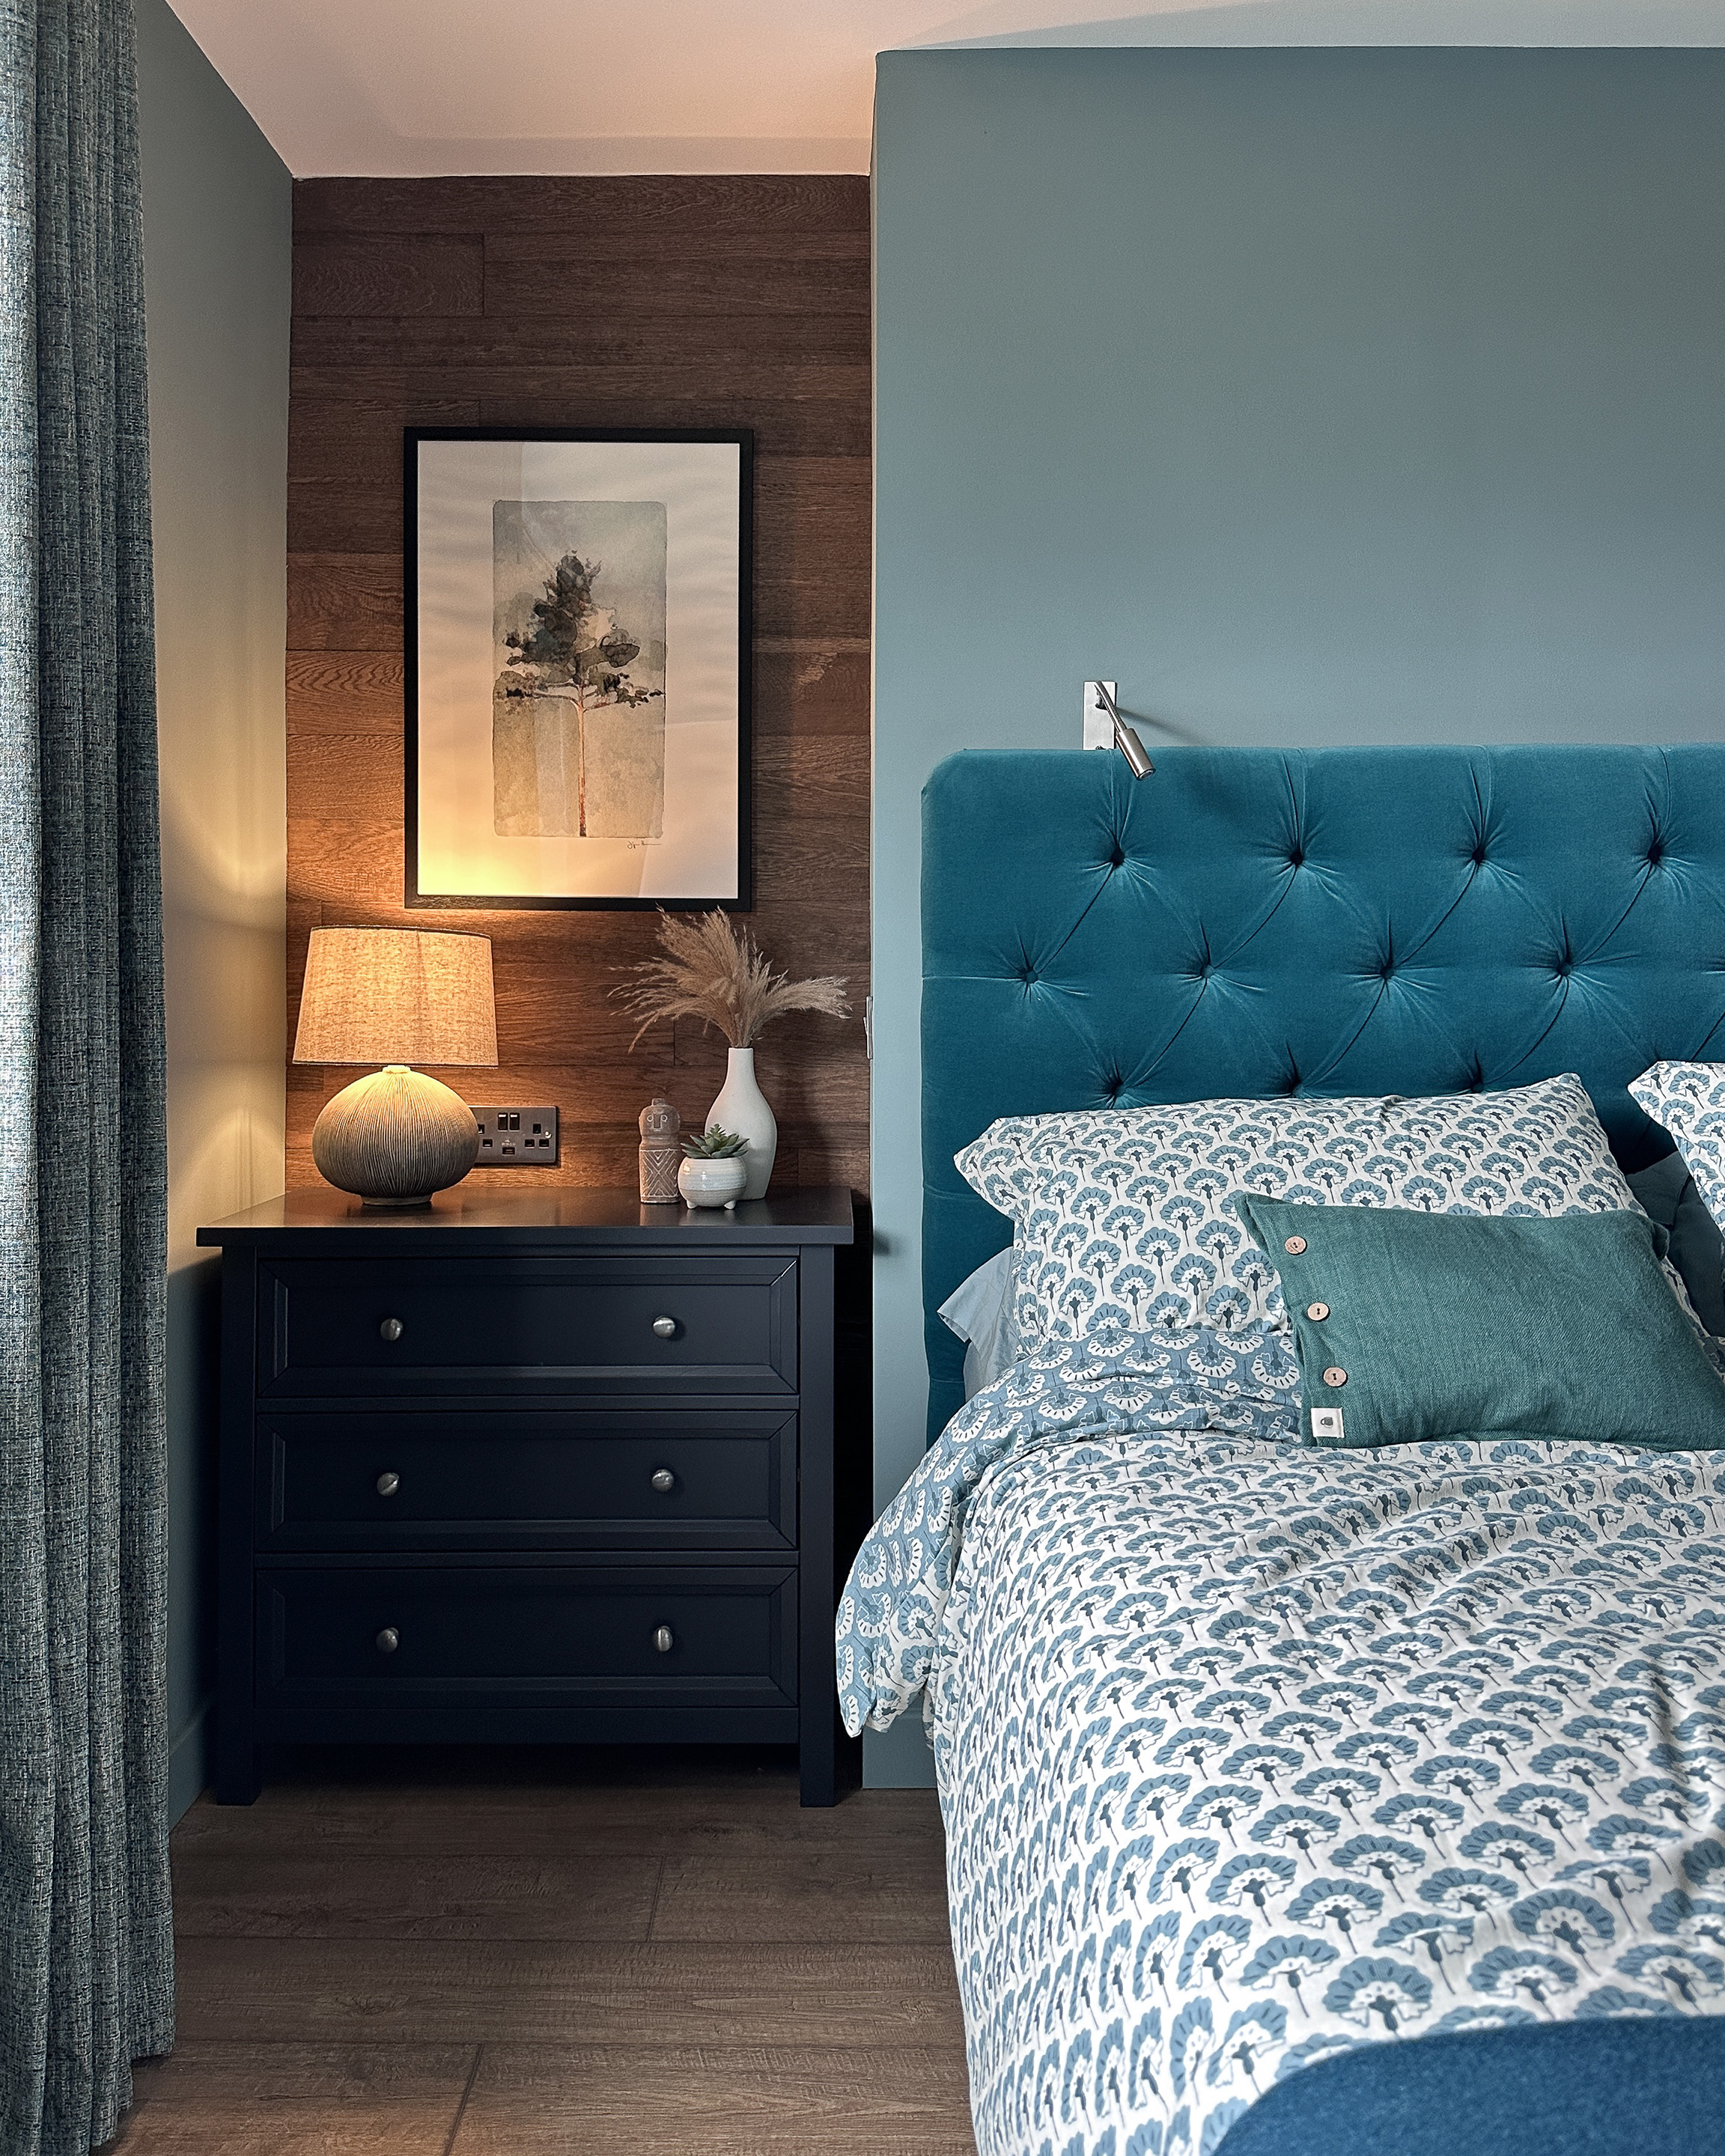 This picture shows a recess space beside the bed which has been panelled in rustic wood at the back, against walls painted in Farrow and Ball Oval Room Blue, a grey green blue, with a black chest of drawers and ceramic lamp. The bed has a teal velvet headboard and is dressed in a motif pattern duvet set from John Lewis.